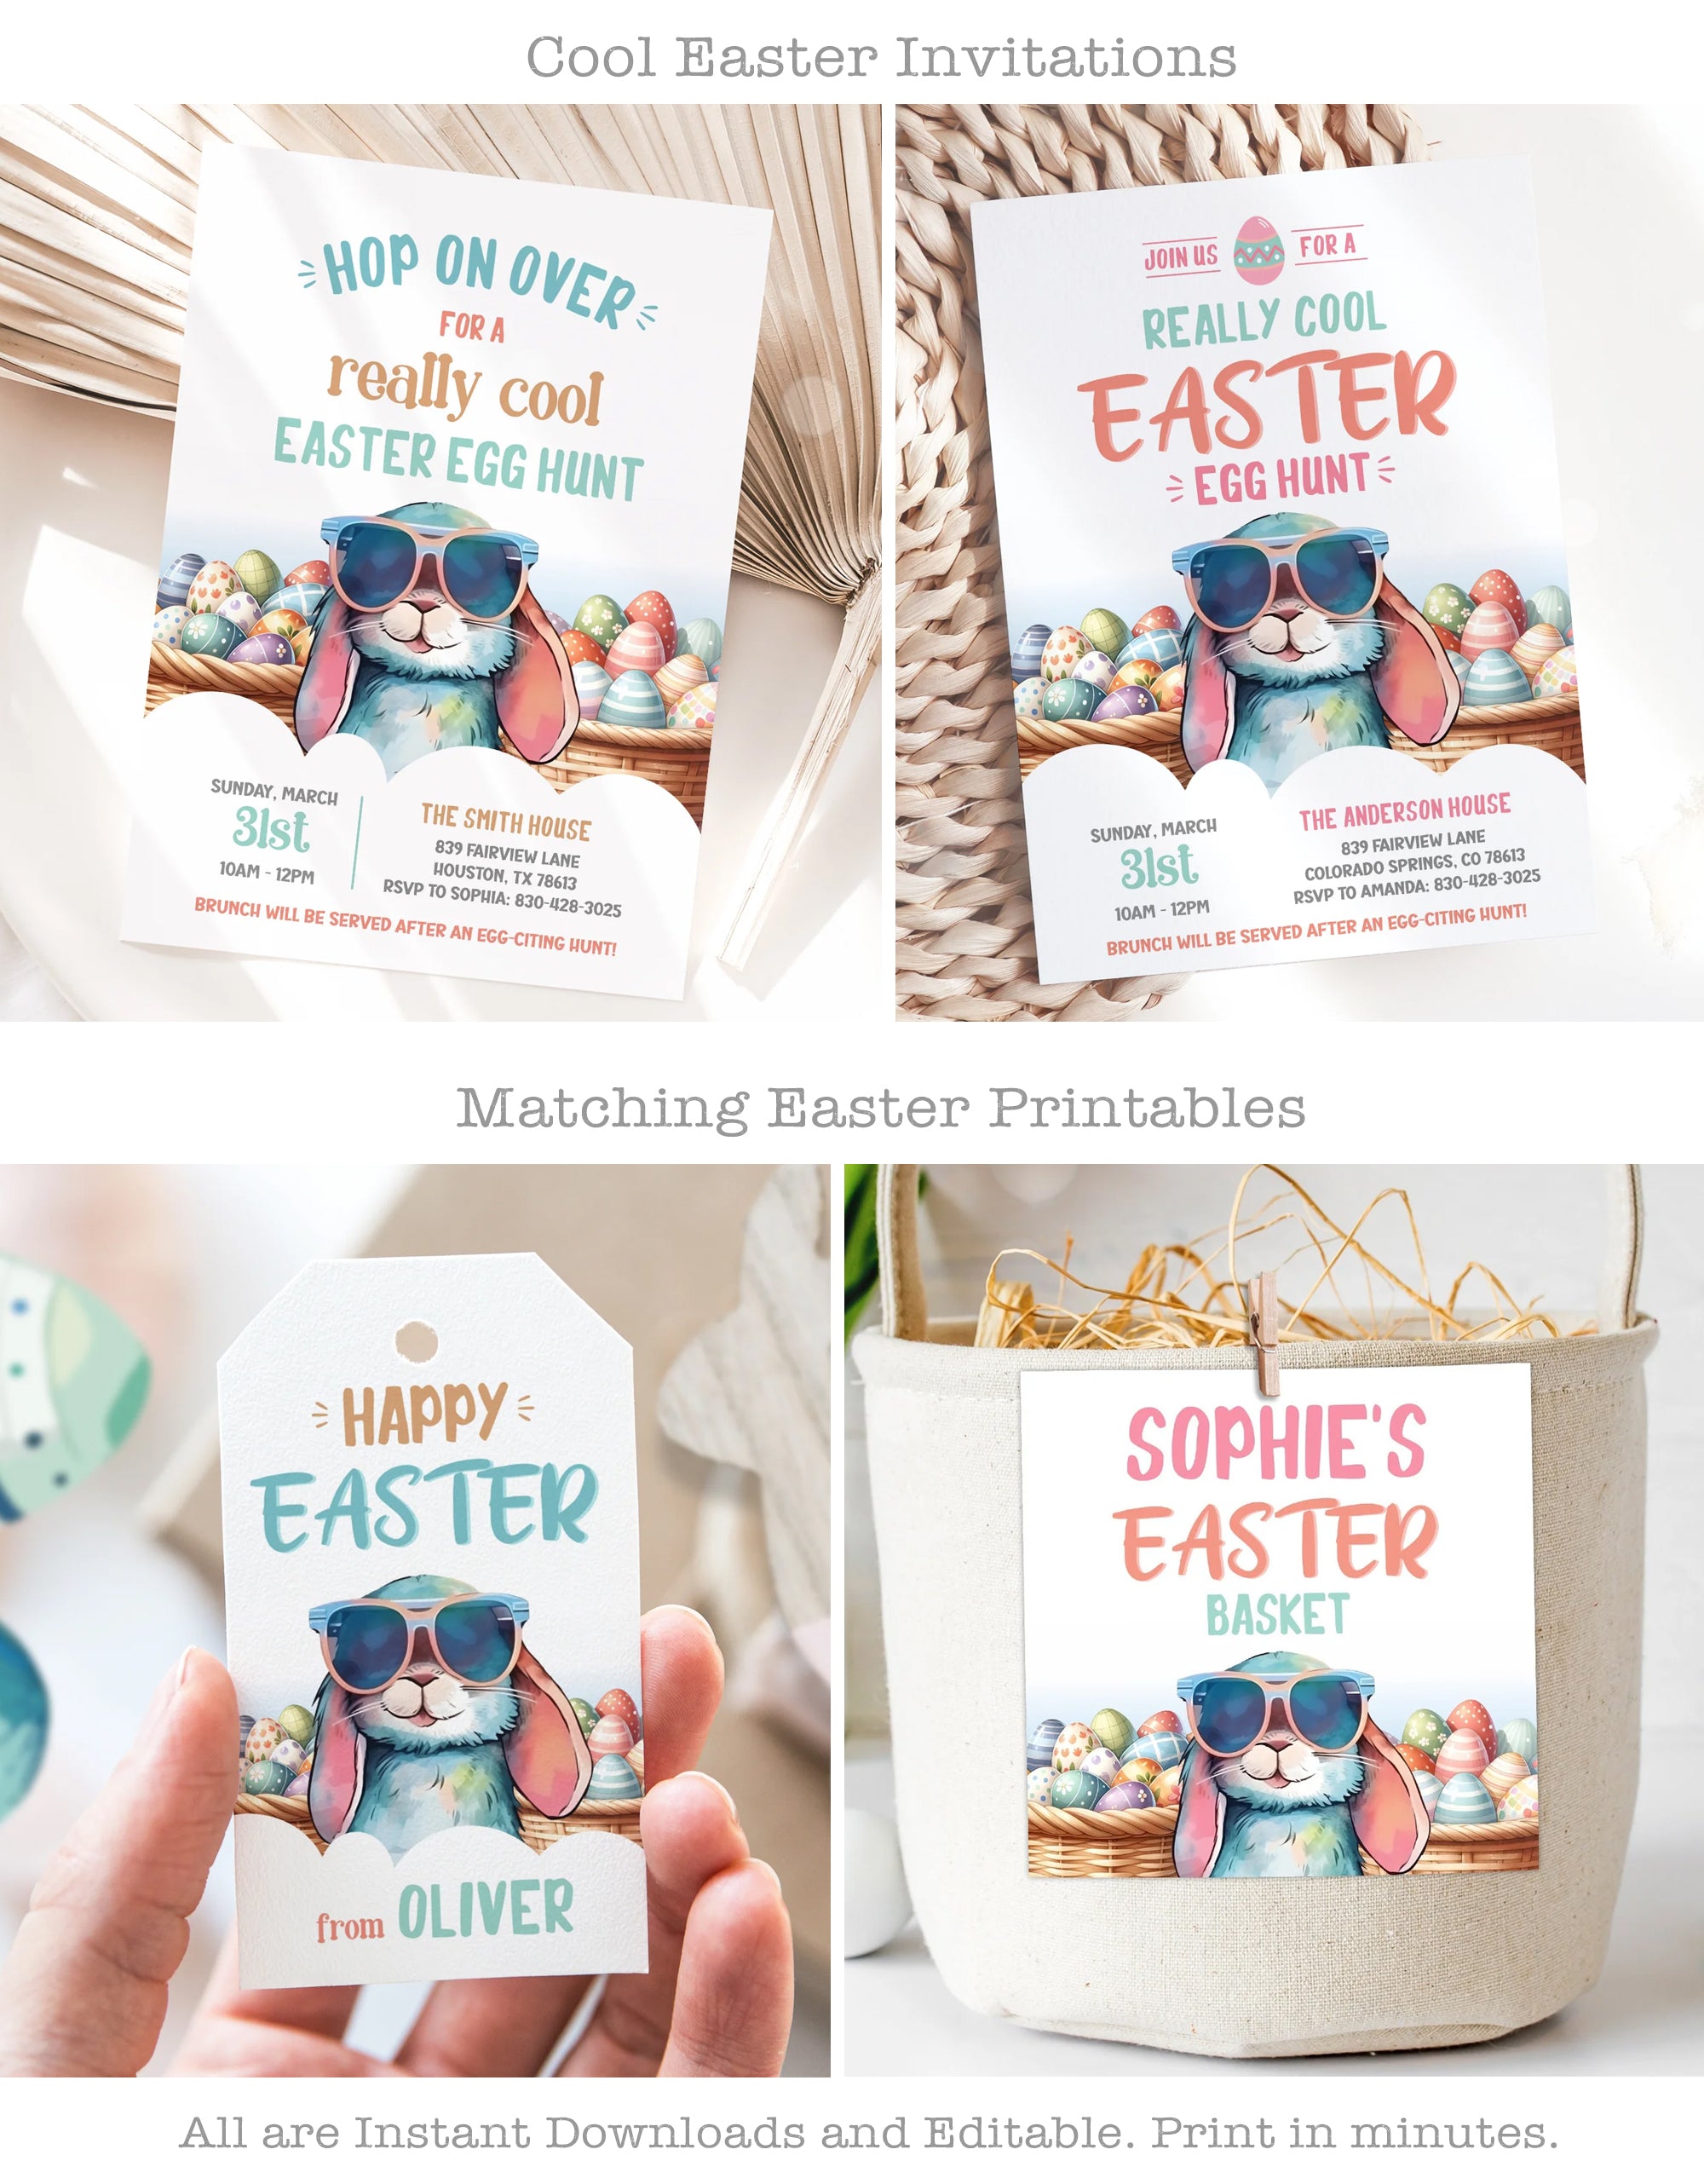 Cool Easter Invitations and Easter Basket Labels - All editable and printable